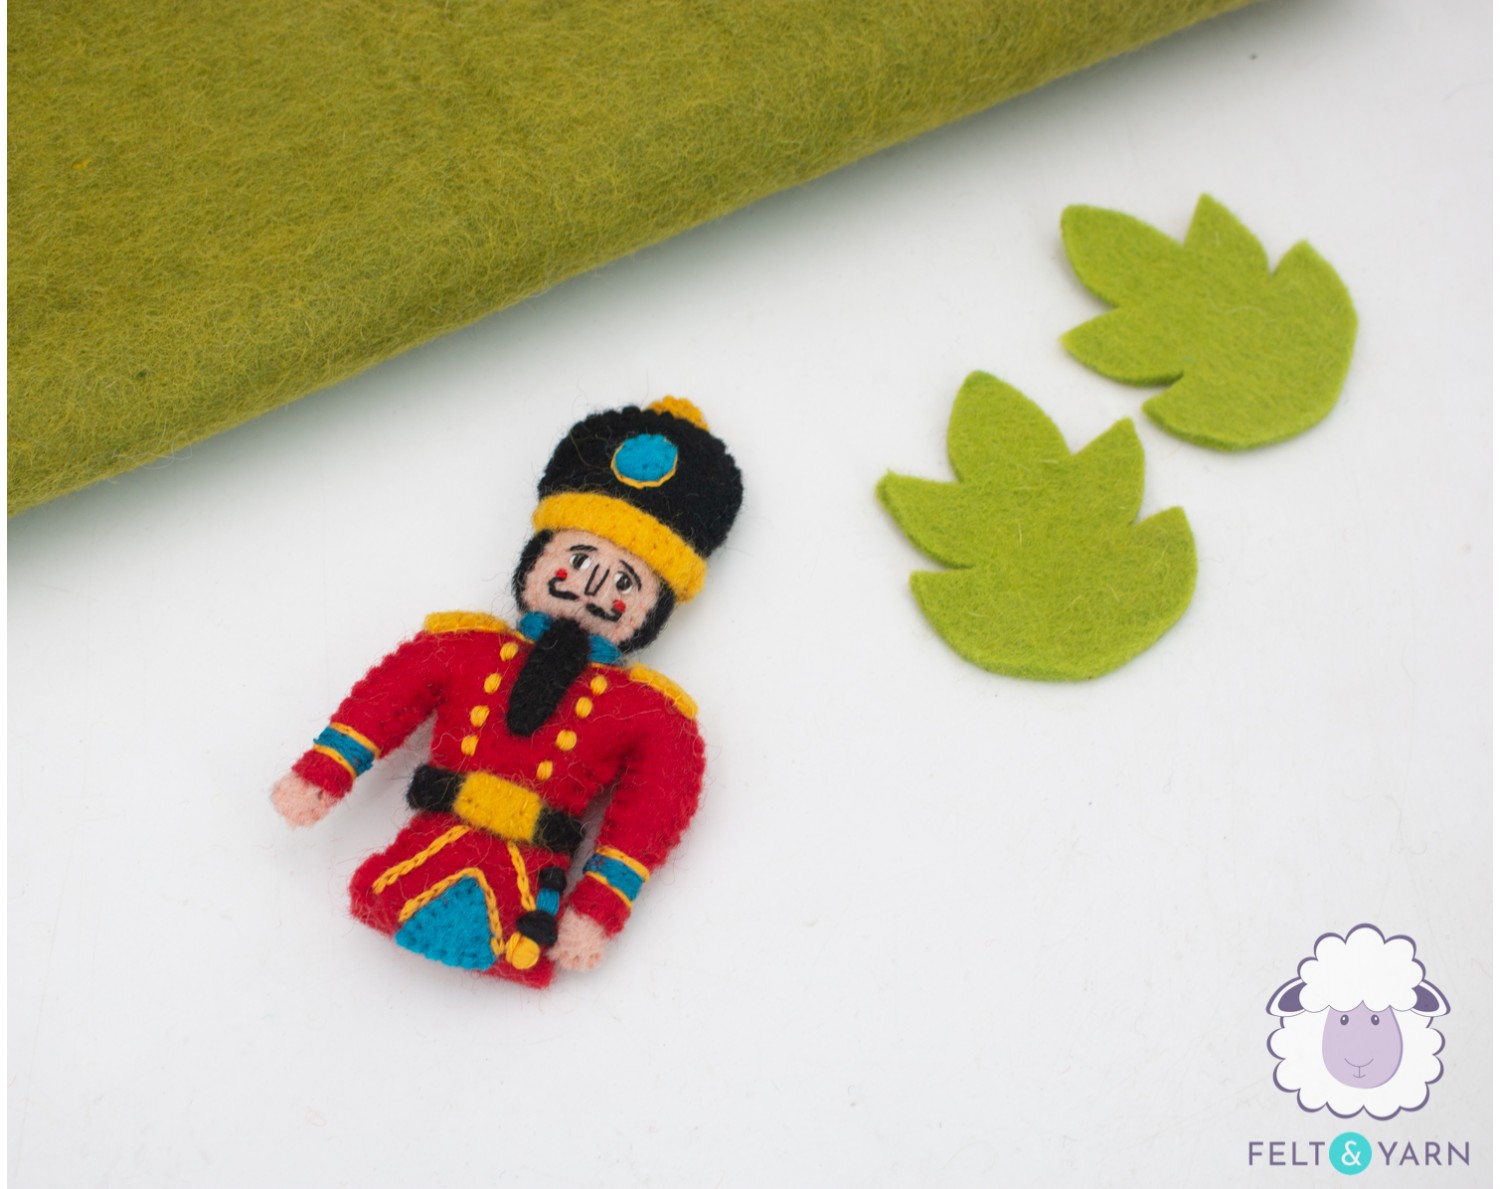 13cm Felt Stitched - The Queen's Guard